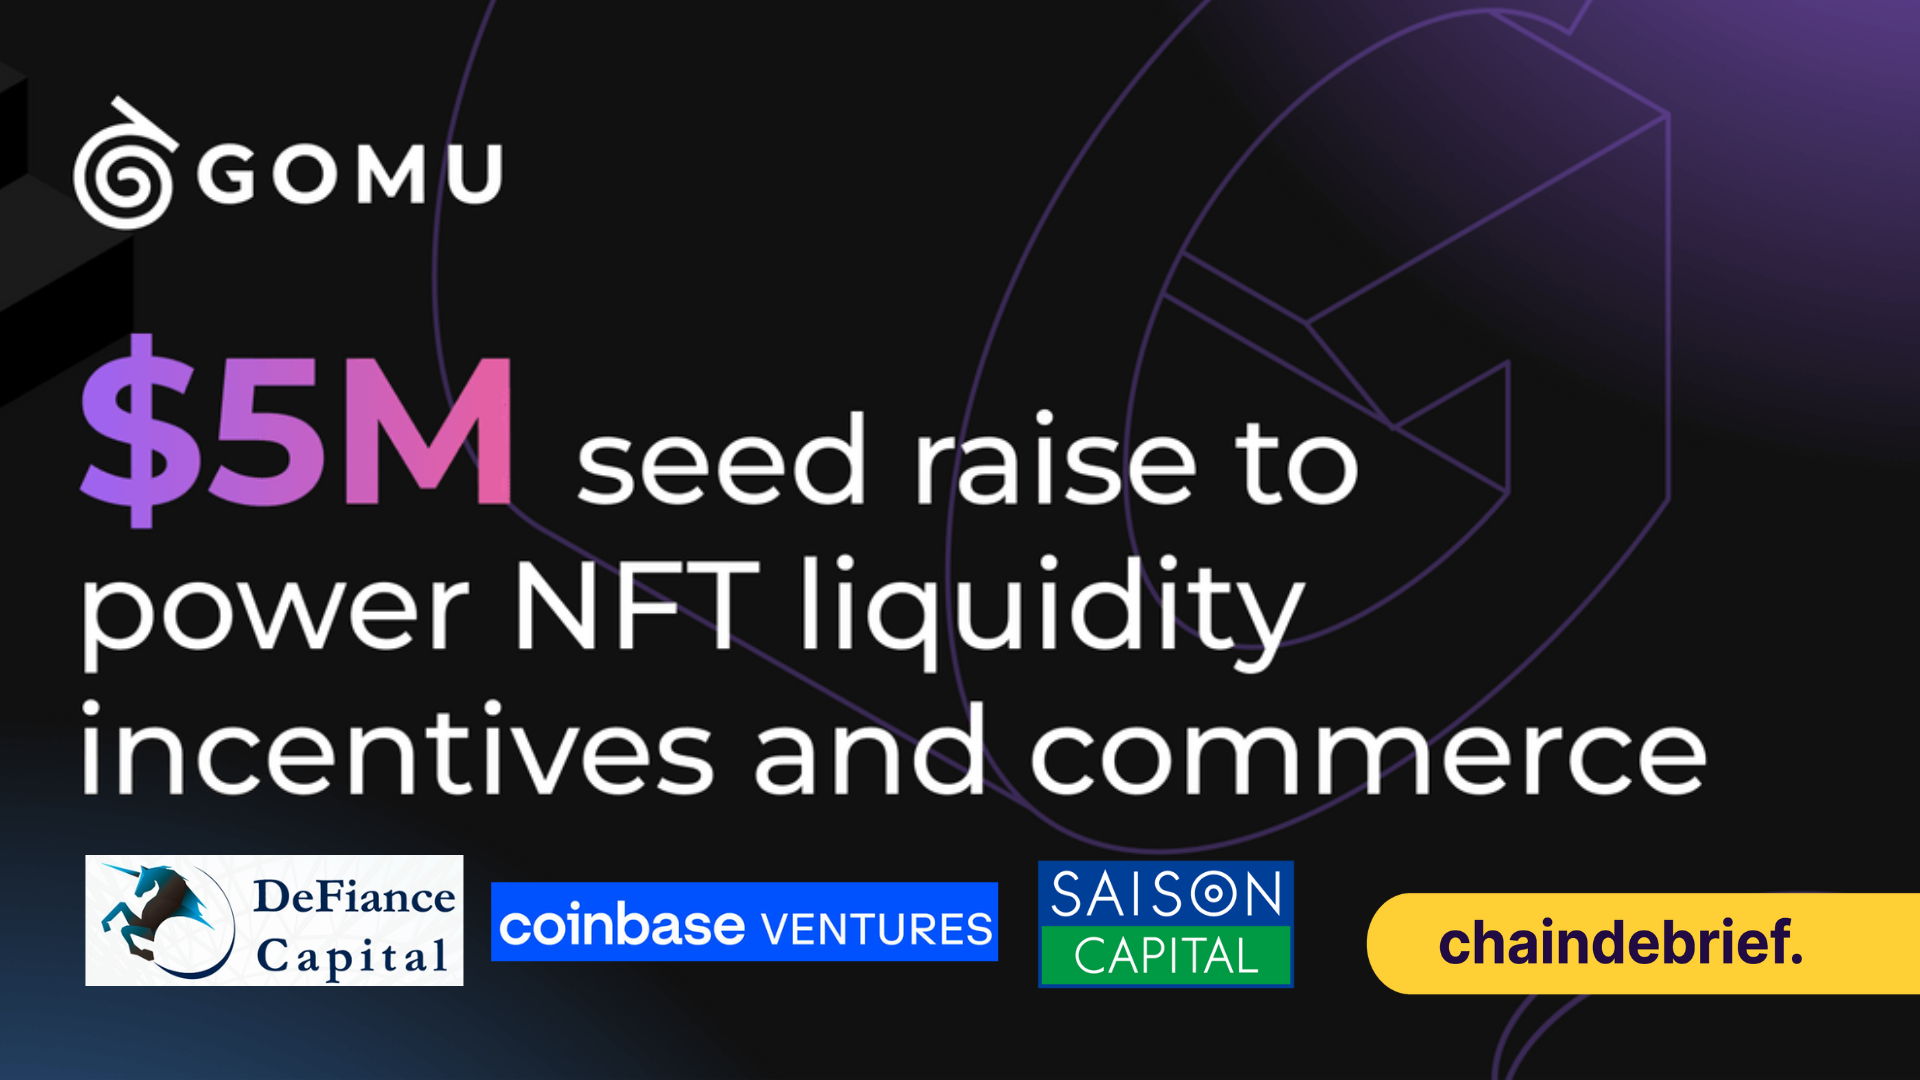 Coinbase Ventures and Defiance Capital Invests In Gomu, Could Possibly Solve NFT’s Liquidity Issue